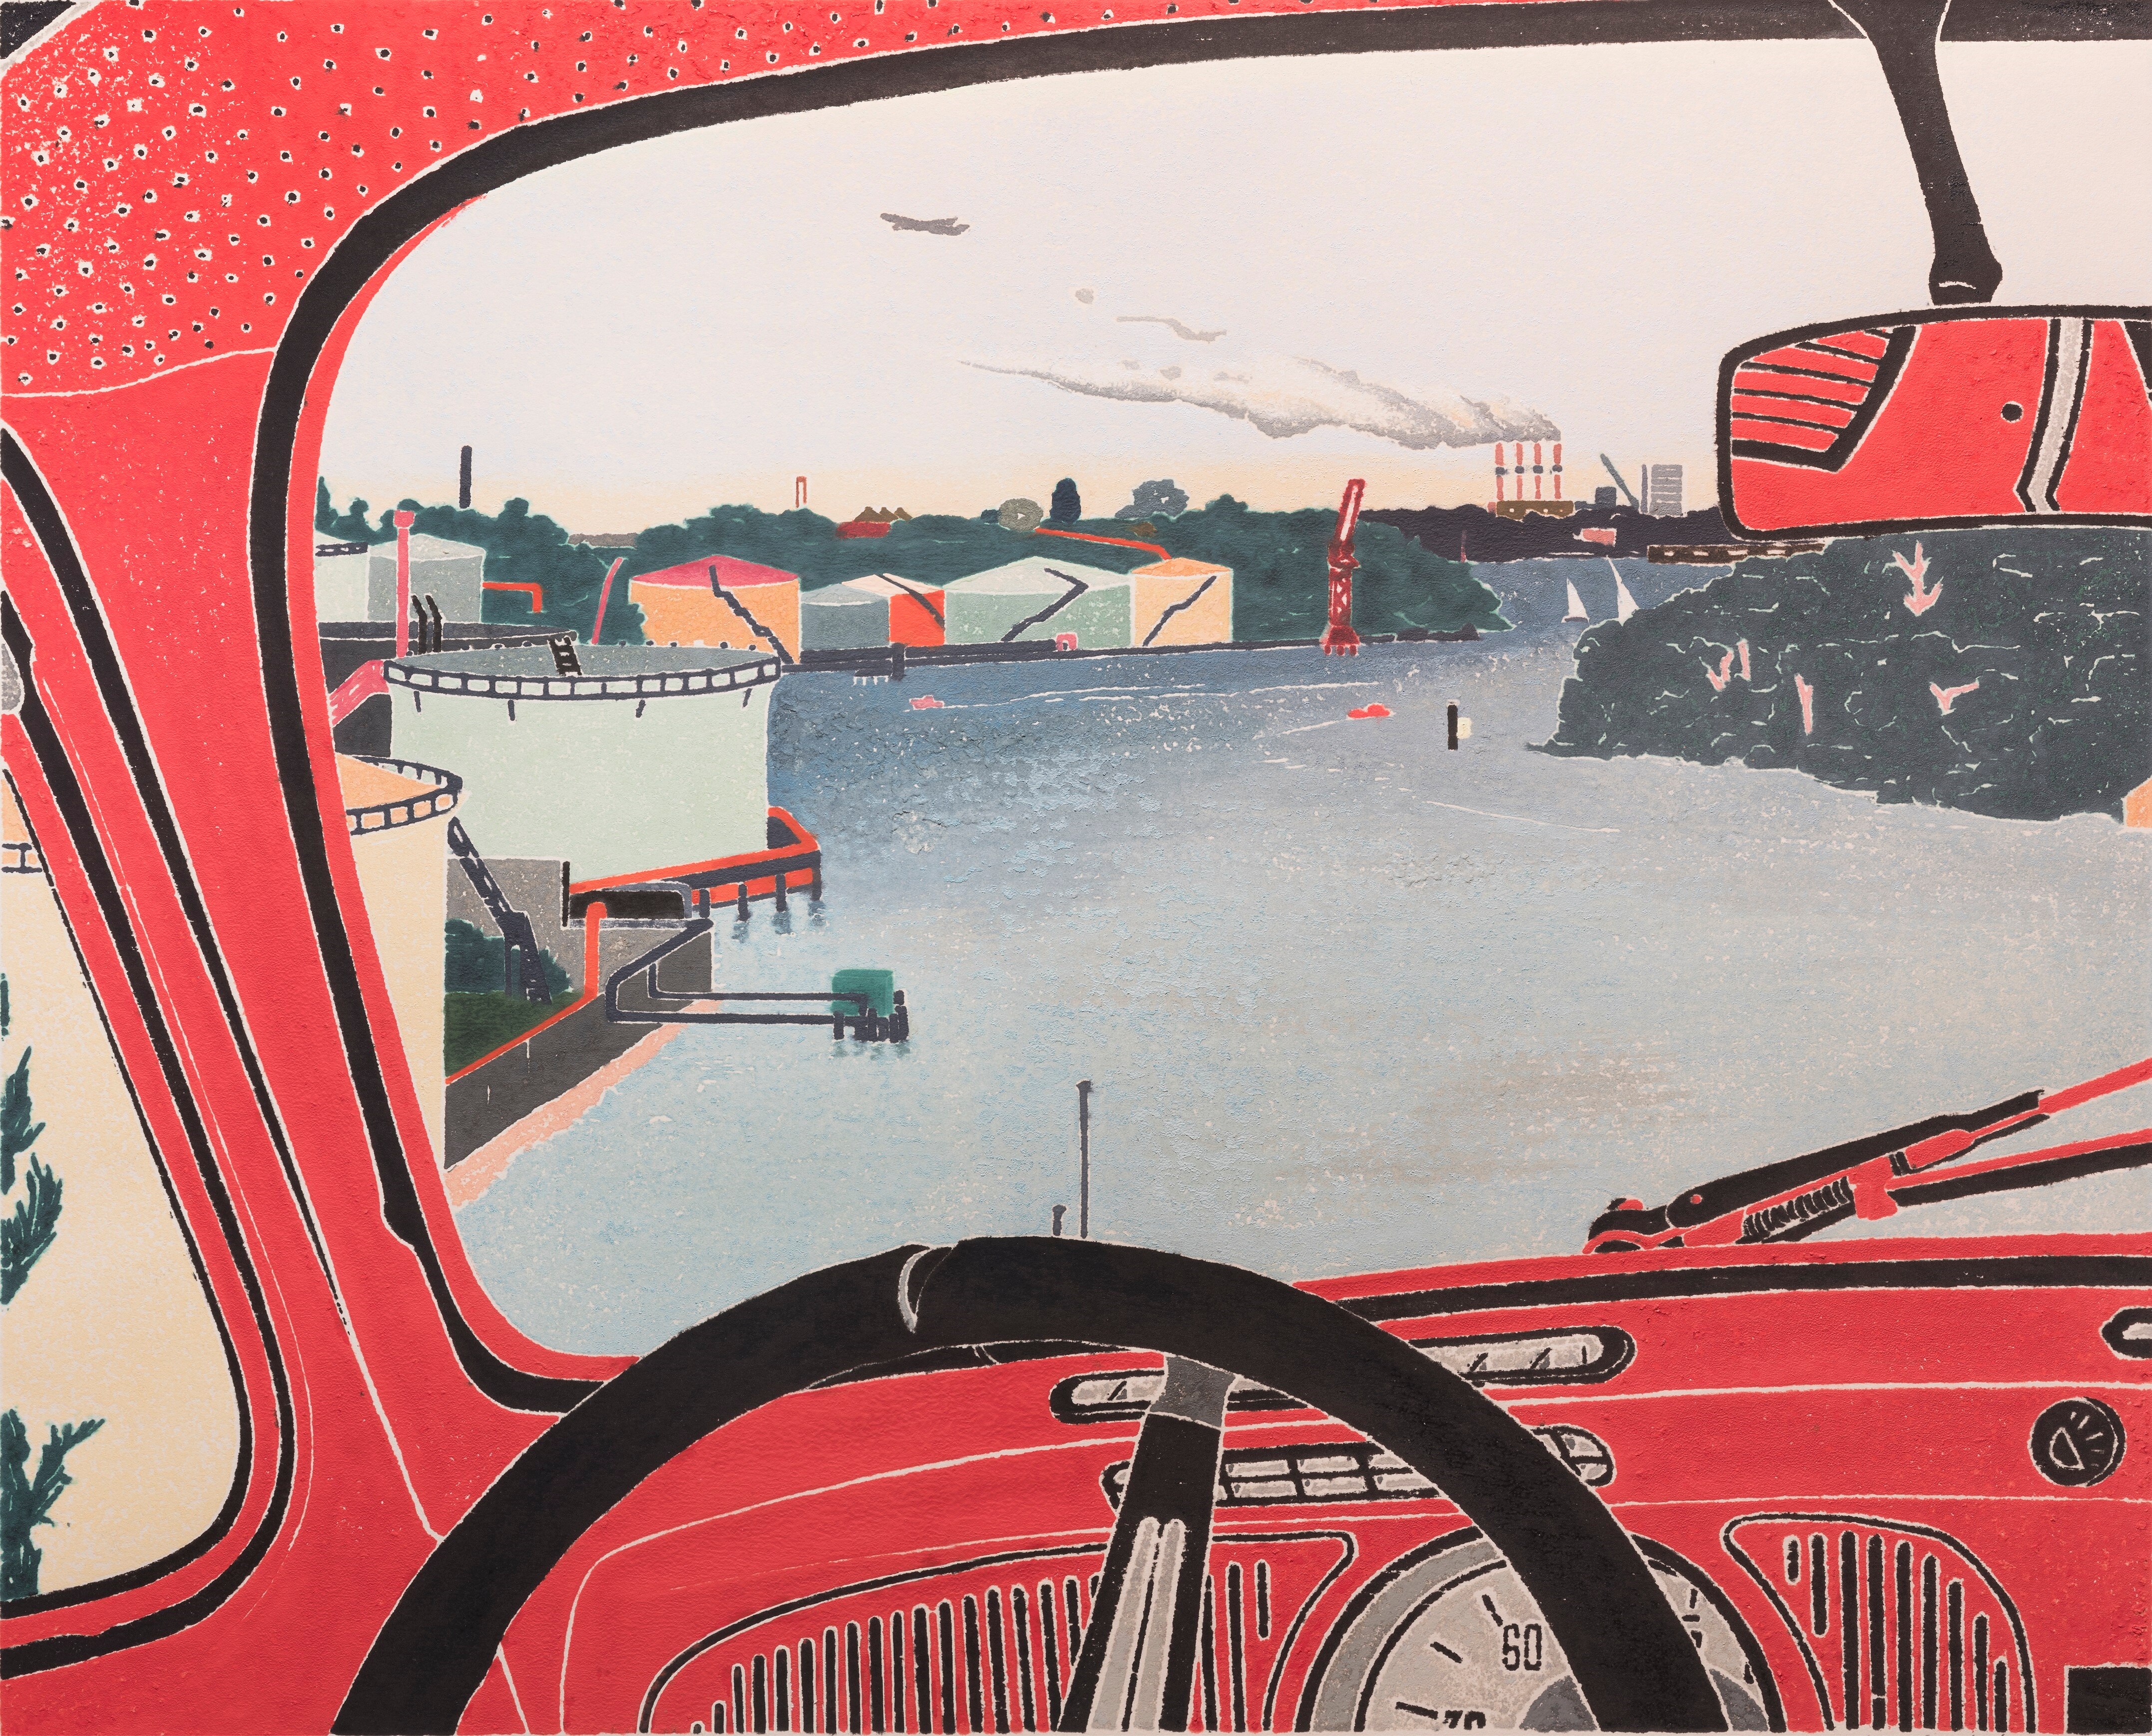 A print/painting by Cressida Campbell of the windscreen of a car looking out on a bay with petrol tanks